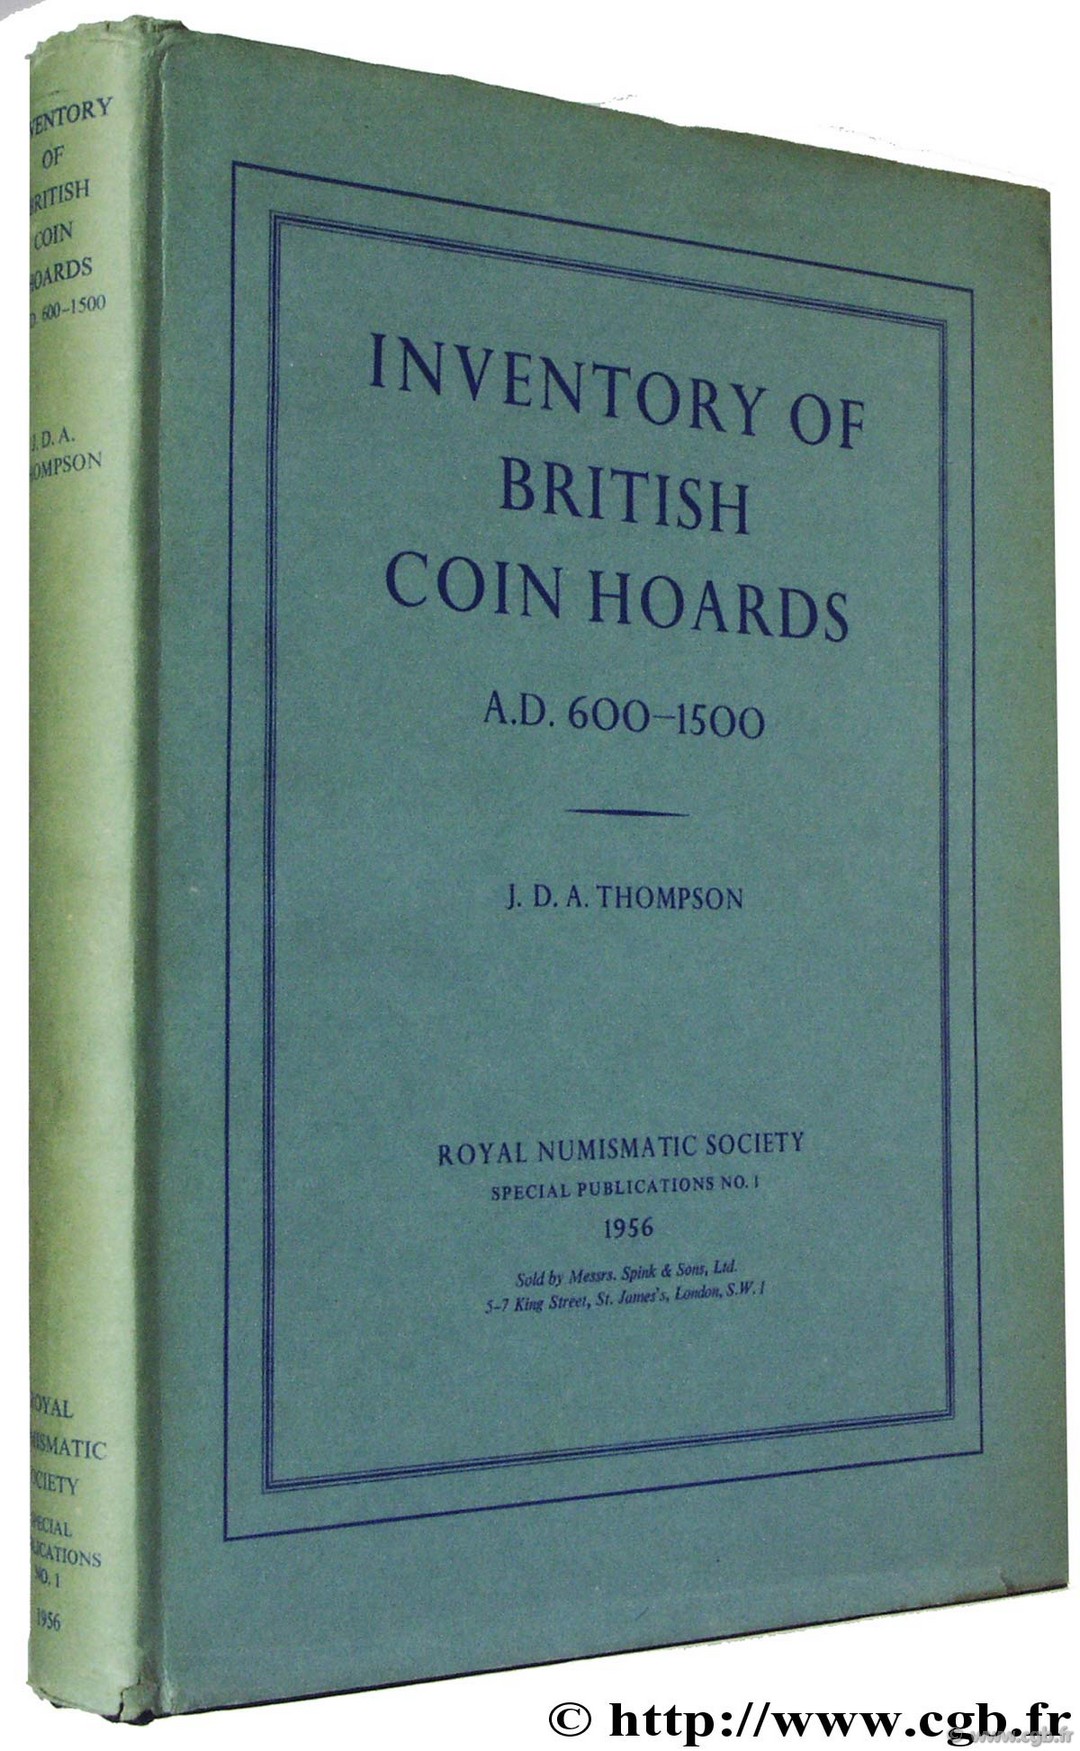 Inventory of British Coins Hoards A.D. 600-1500, Royal Numismatic Society n° 1 THOMPSON J.-D.-A.